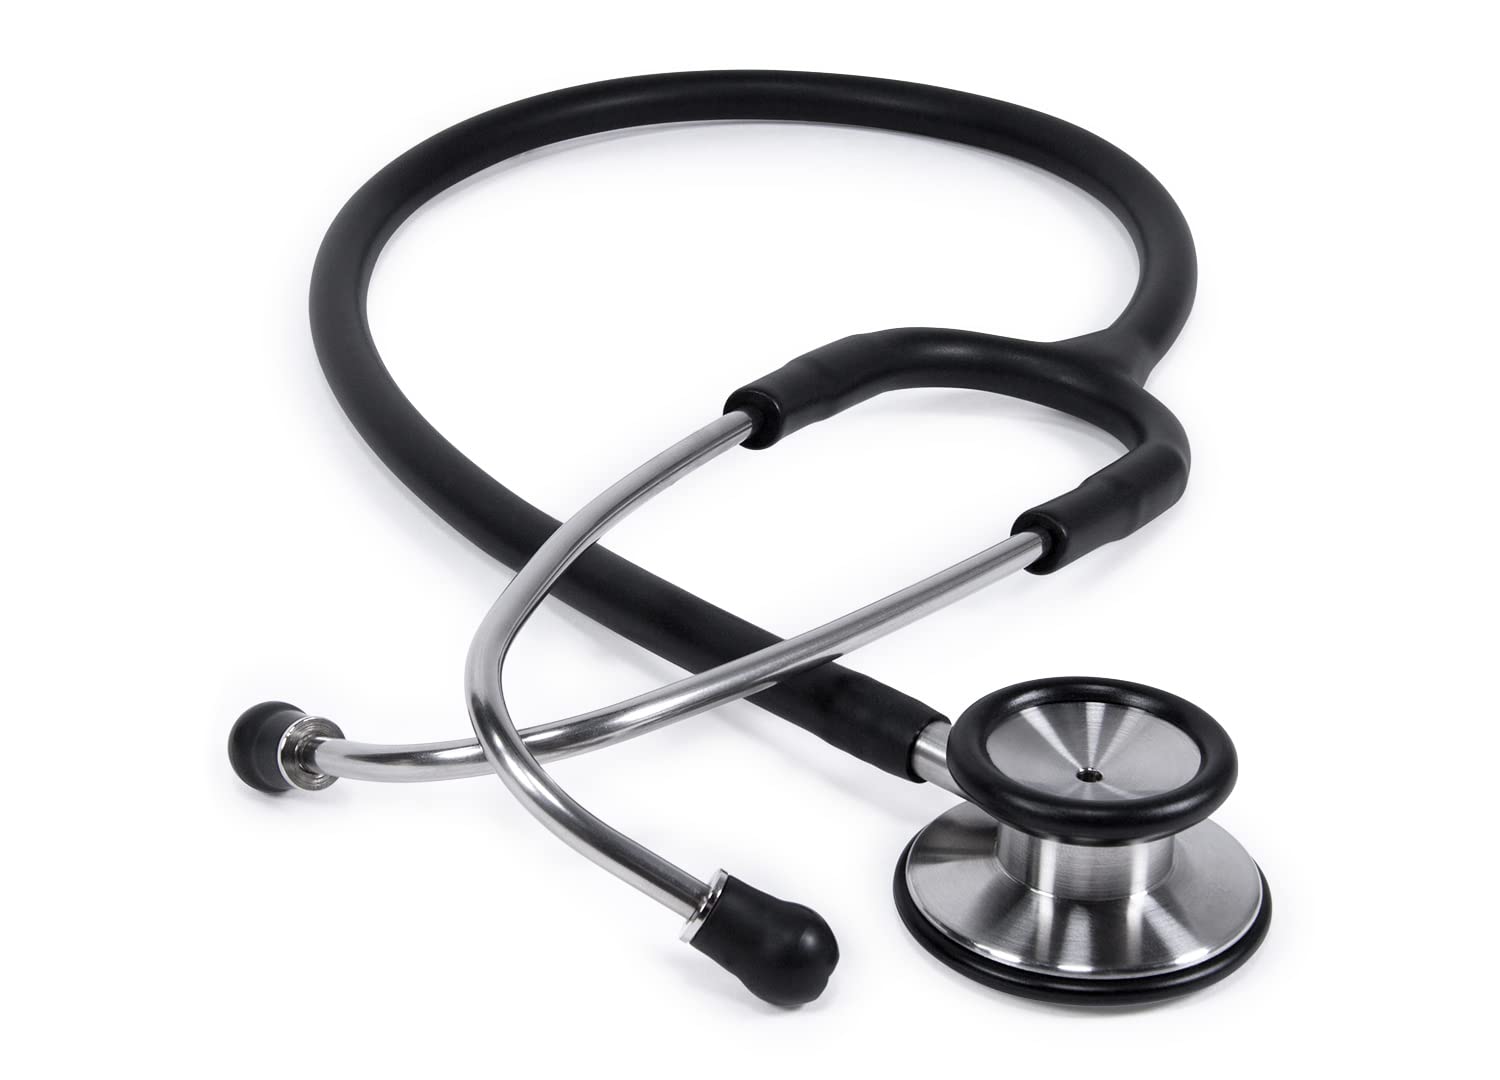 Book Cover Greater Goods Lightweight Dual-Head Stethoscope - A Sturdy Latex-Free Stethoscope with Insulated, Single Tubing, Tight-Seal Eartips, and Heavy Gauge Alloy | Free Additional Ear Tips and Diaphragm